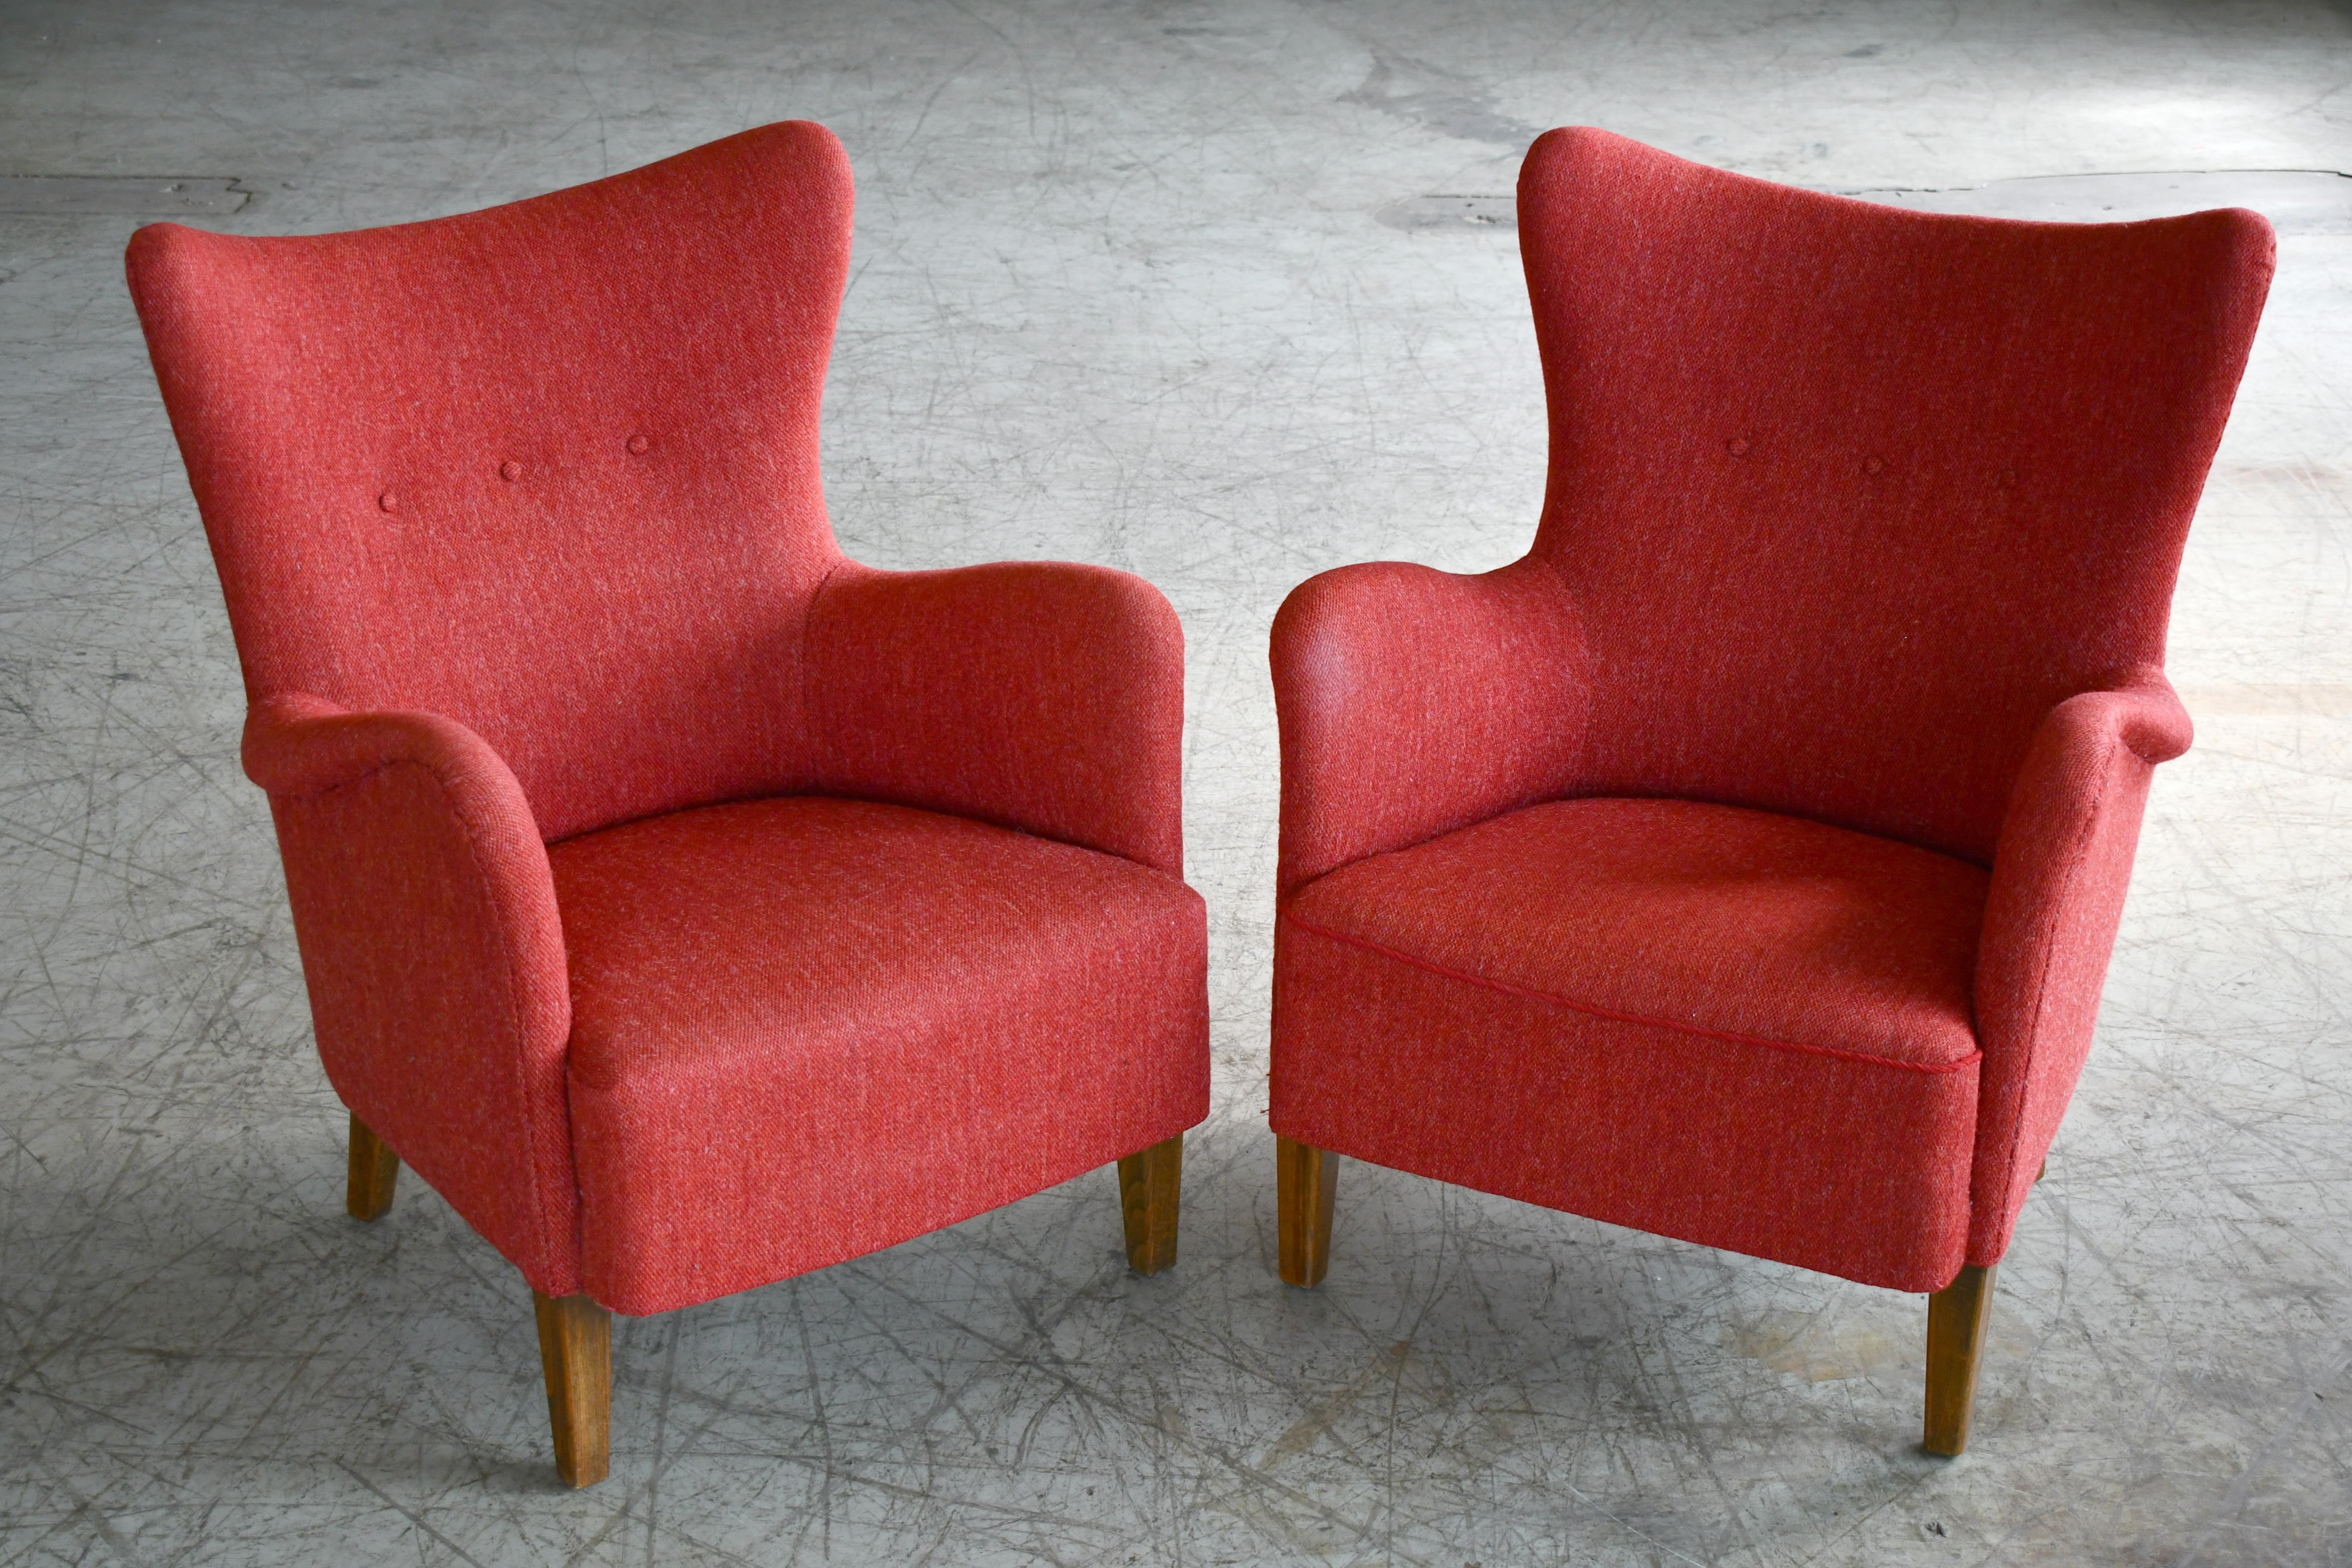 Superbly elegant and very rare pair of Frode Holm designed lounge chairs. The chairs were first mentioned in a Danish magazine for Industrial art in 1944 and were produced for Premier Copenhagen- based retailer, Illums Boilighus which is still in